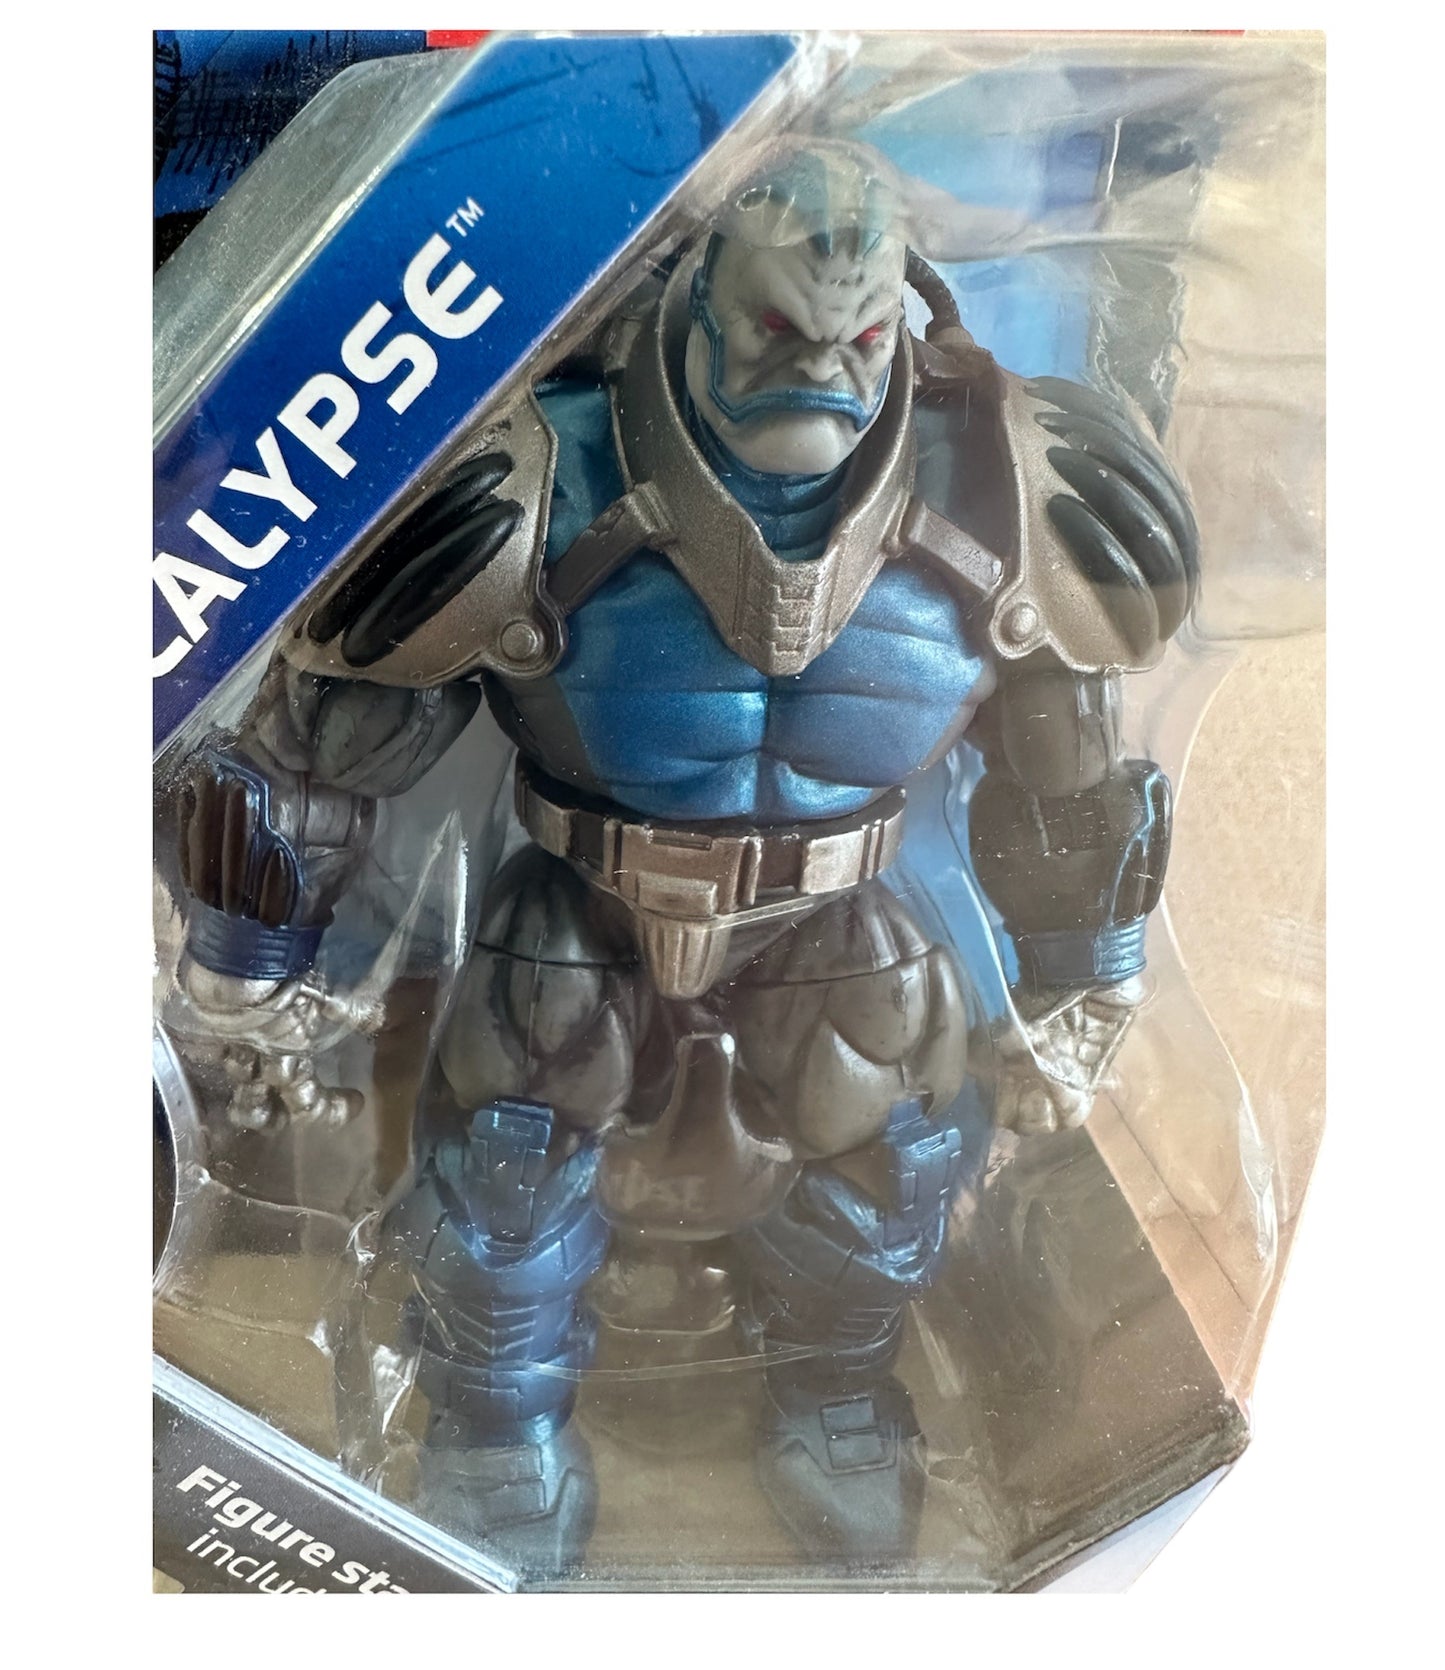 Vintage 2010 Marvel Universe Series 3 - No. 009 Apocalypse 3 3/4 Inch Action Figure With Display Stand - Brand New Factory Sealed Shop Stock Room Find